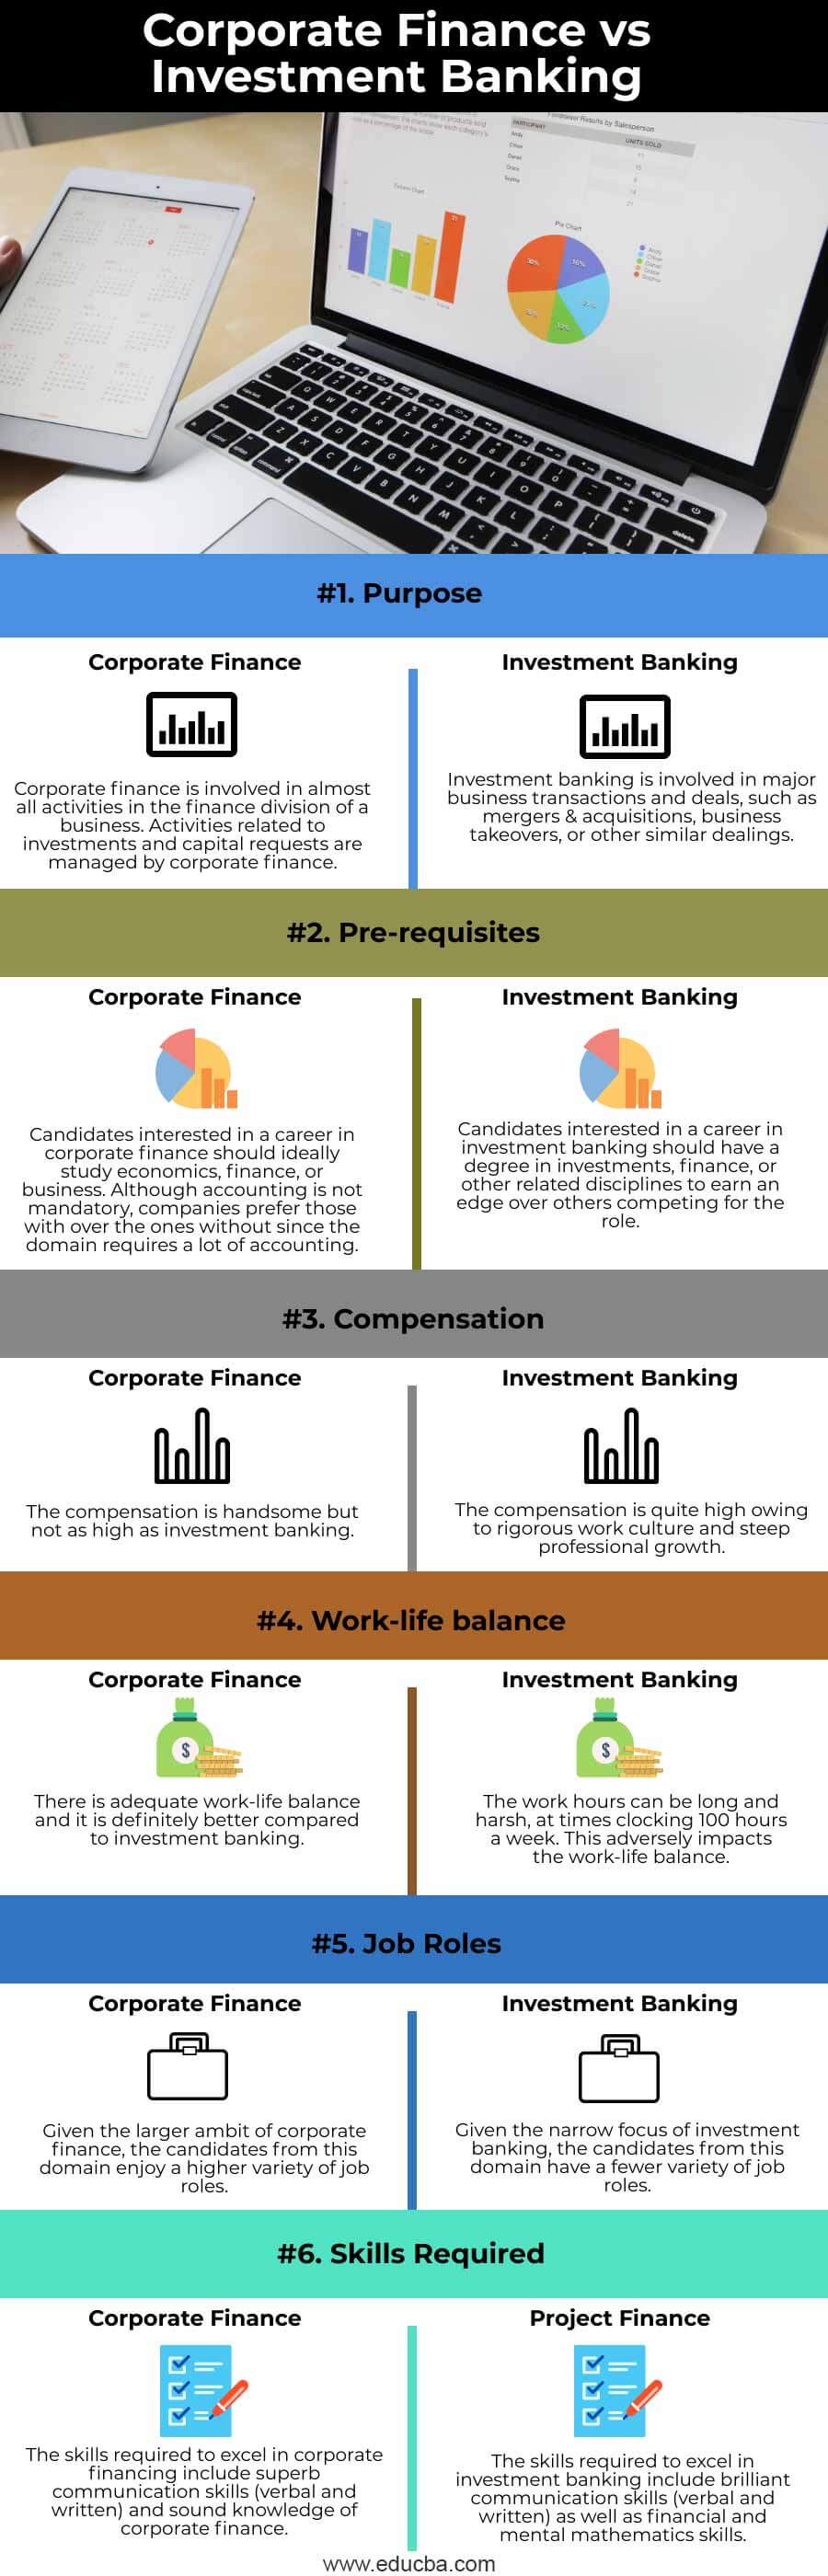 Corporate-Finance-vs-Investment-Banking-info